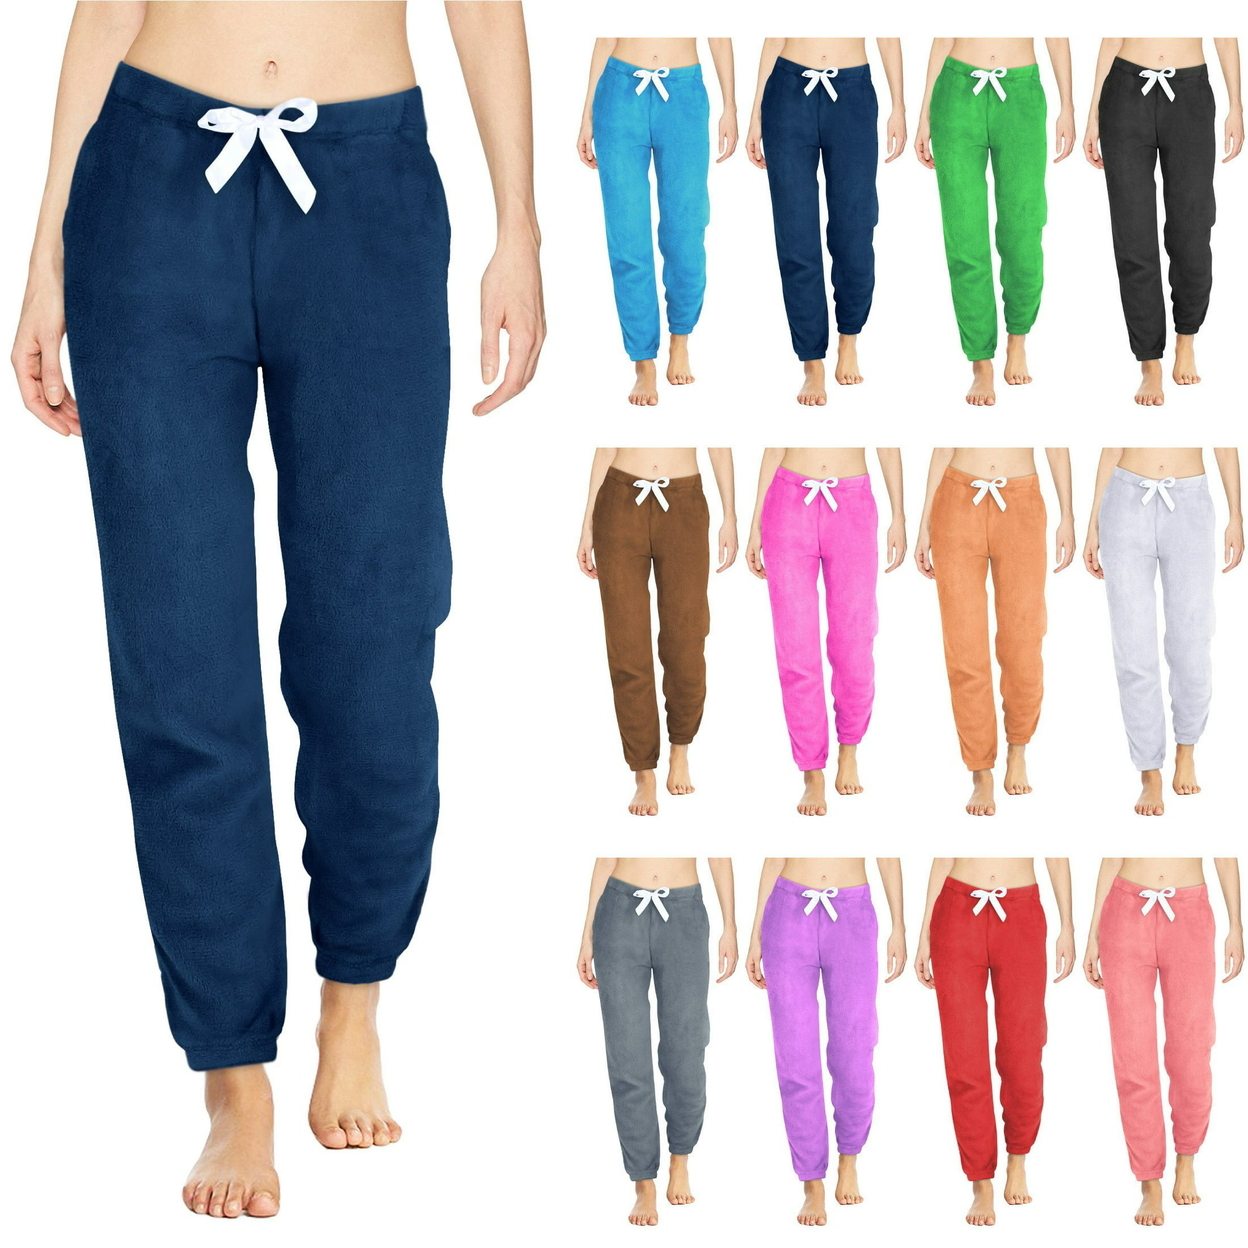 Multi-Pack: Women's Solid & Printed Ultra-Soft Comfy Stretch Micro-Fleece Pajama Lounge Pants - 3-pack, Medium, Love